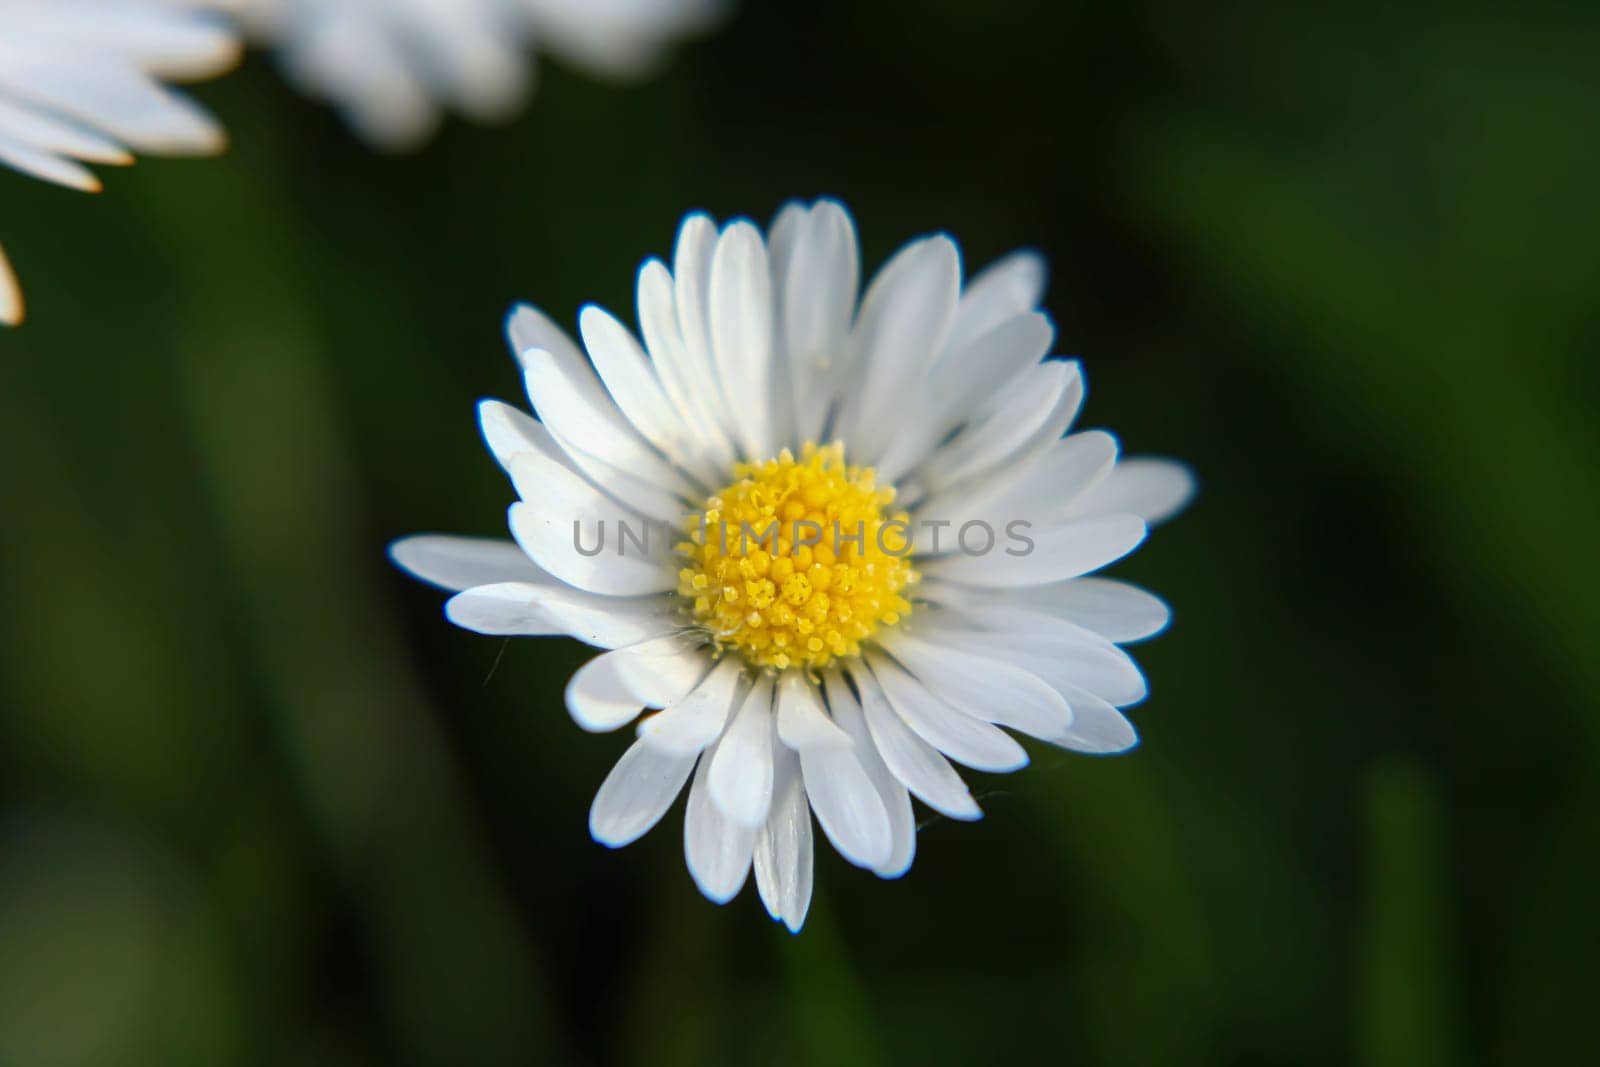 Absolute Beautiful Daisy flower blooming in the park during sunlight of summer day, good for room decor or multimedia background